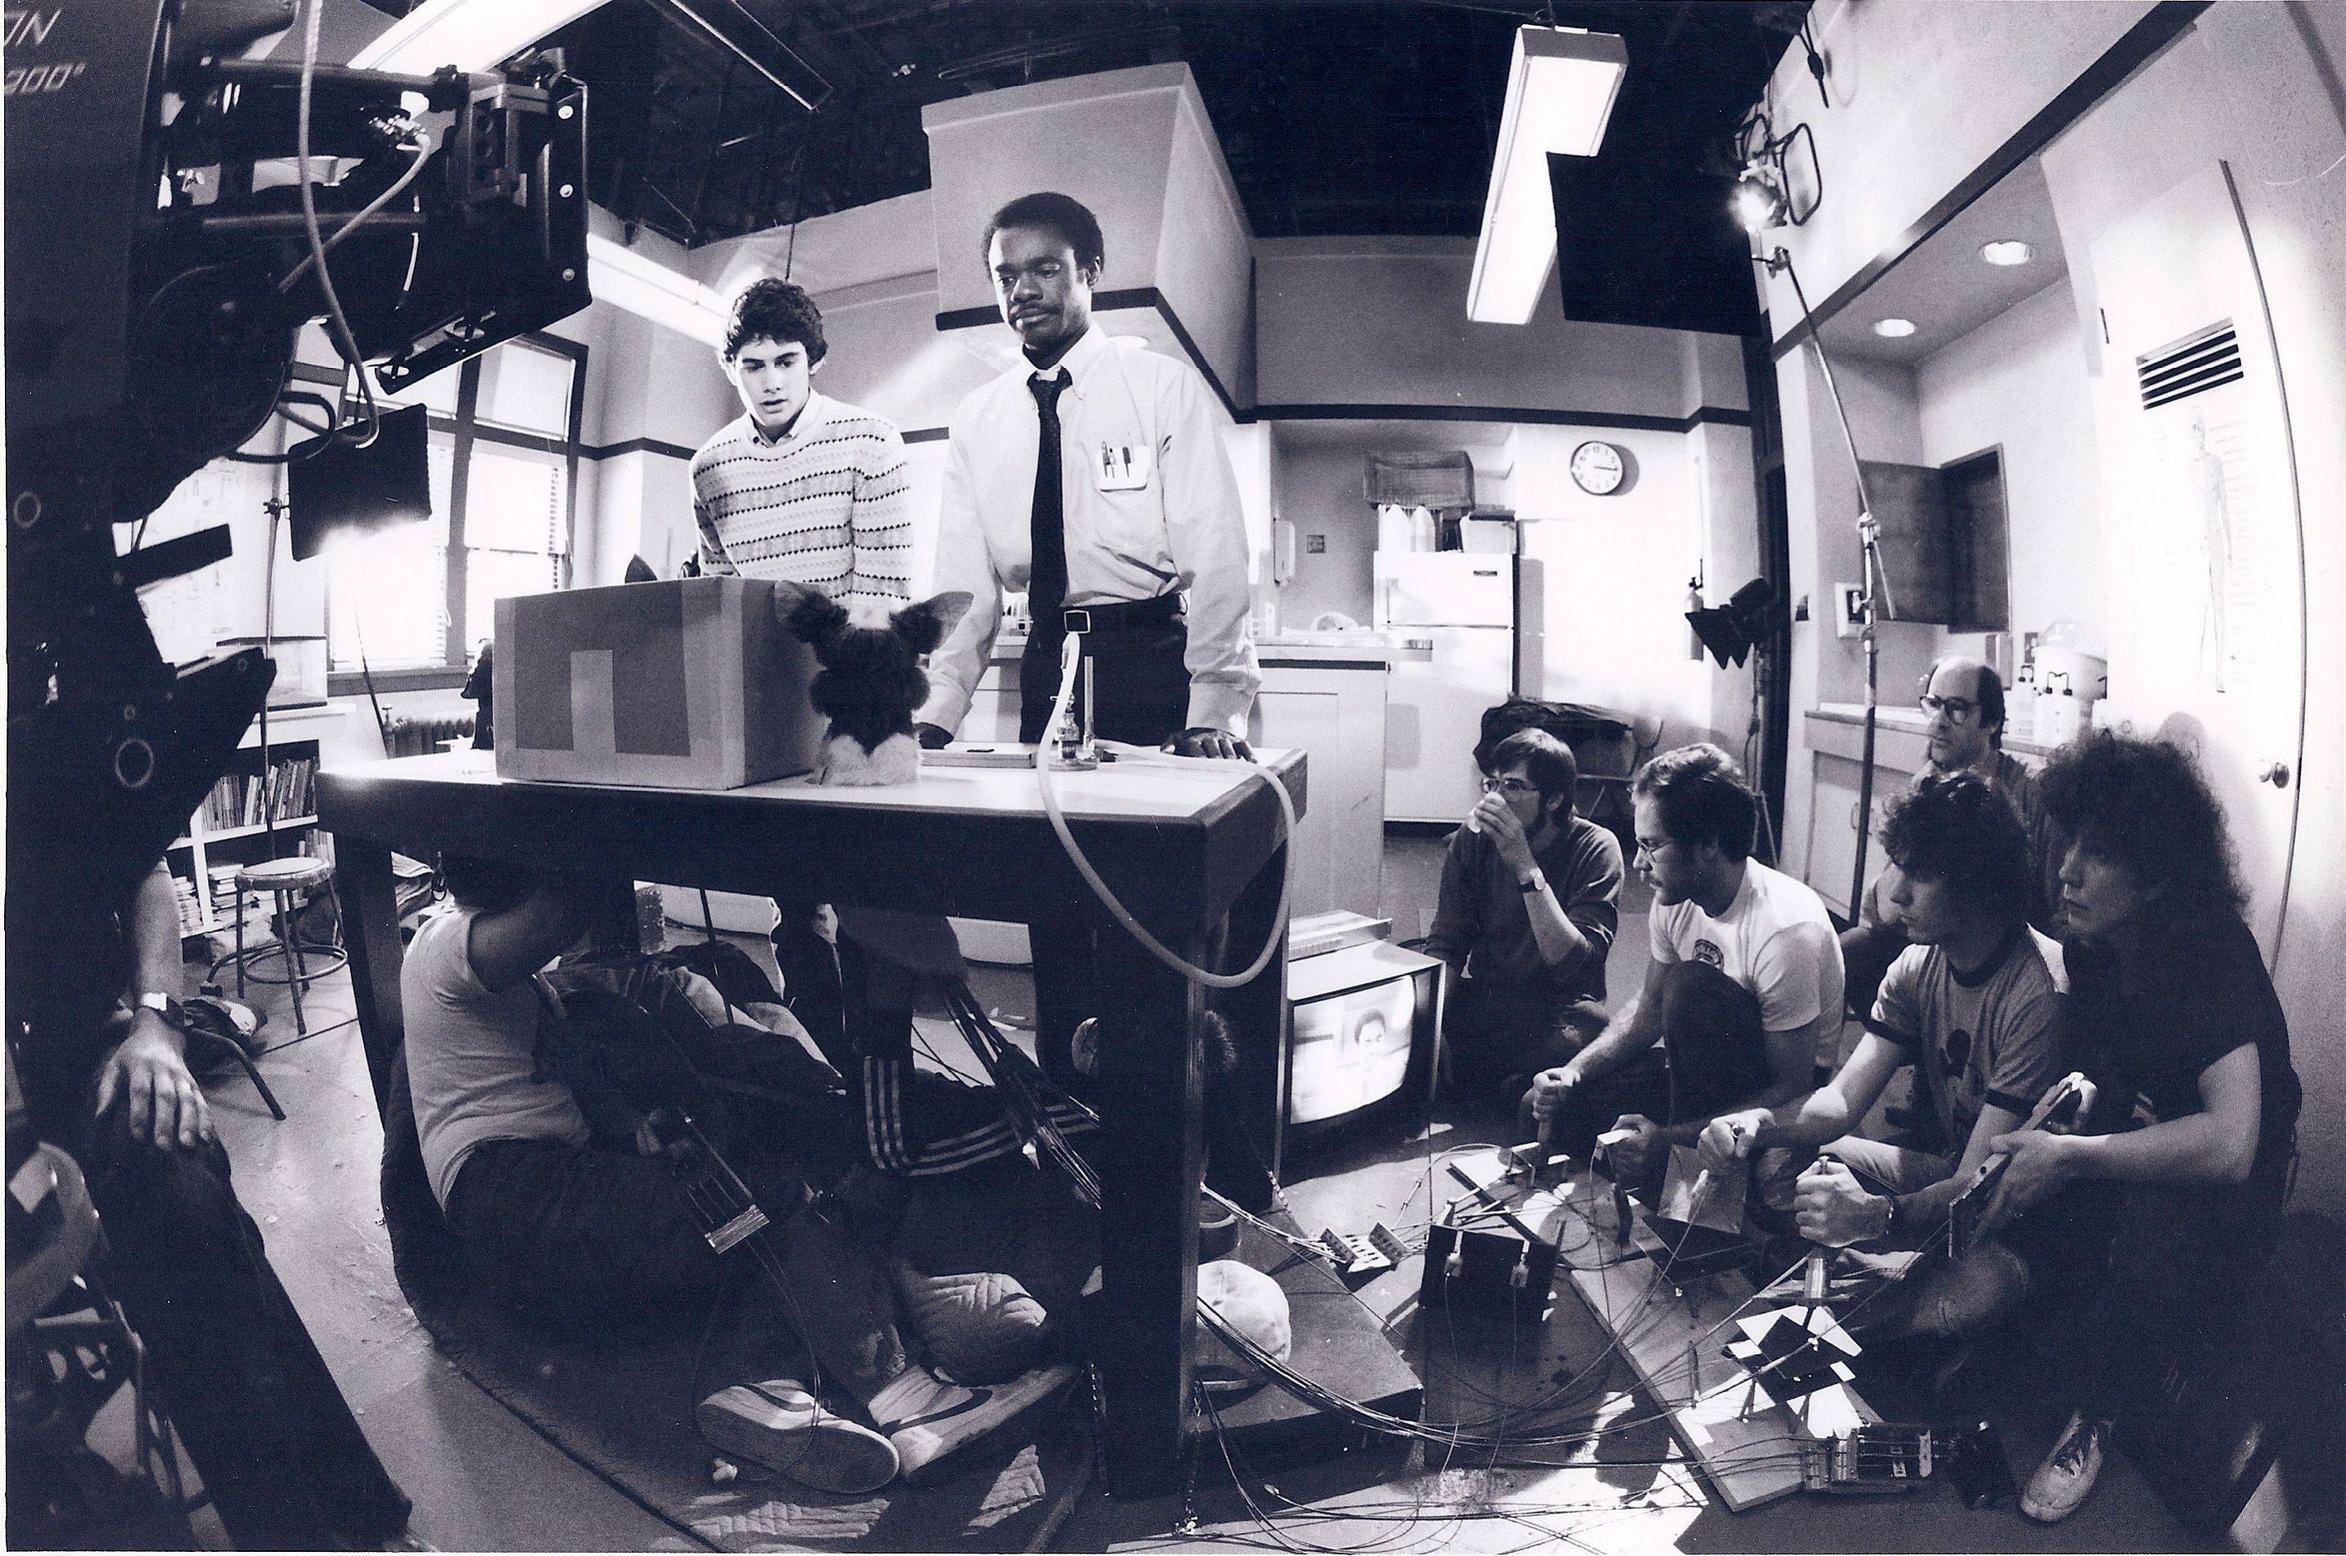 6 Crew members work the controls of the furry creatures while Zach Galligan and Glynn Turman prepare for their scene in Gremlins (1984).